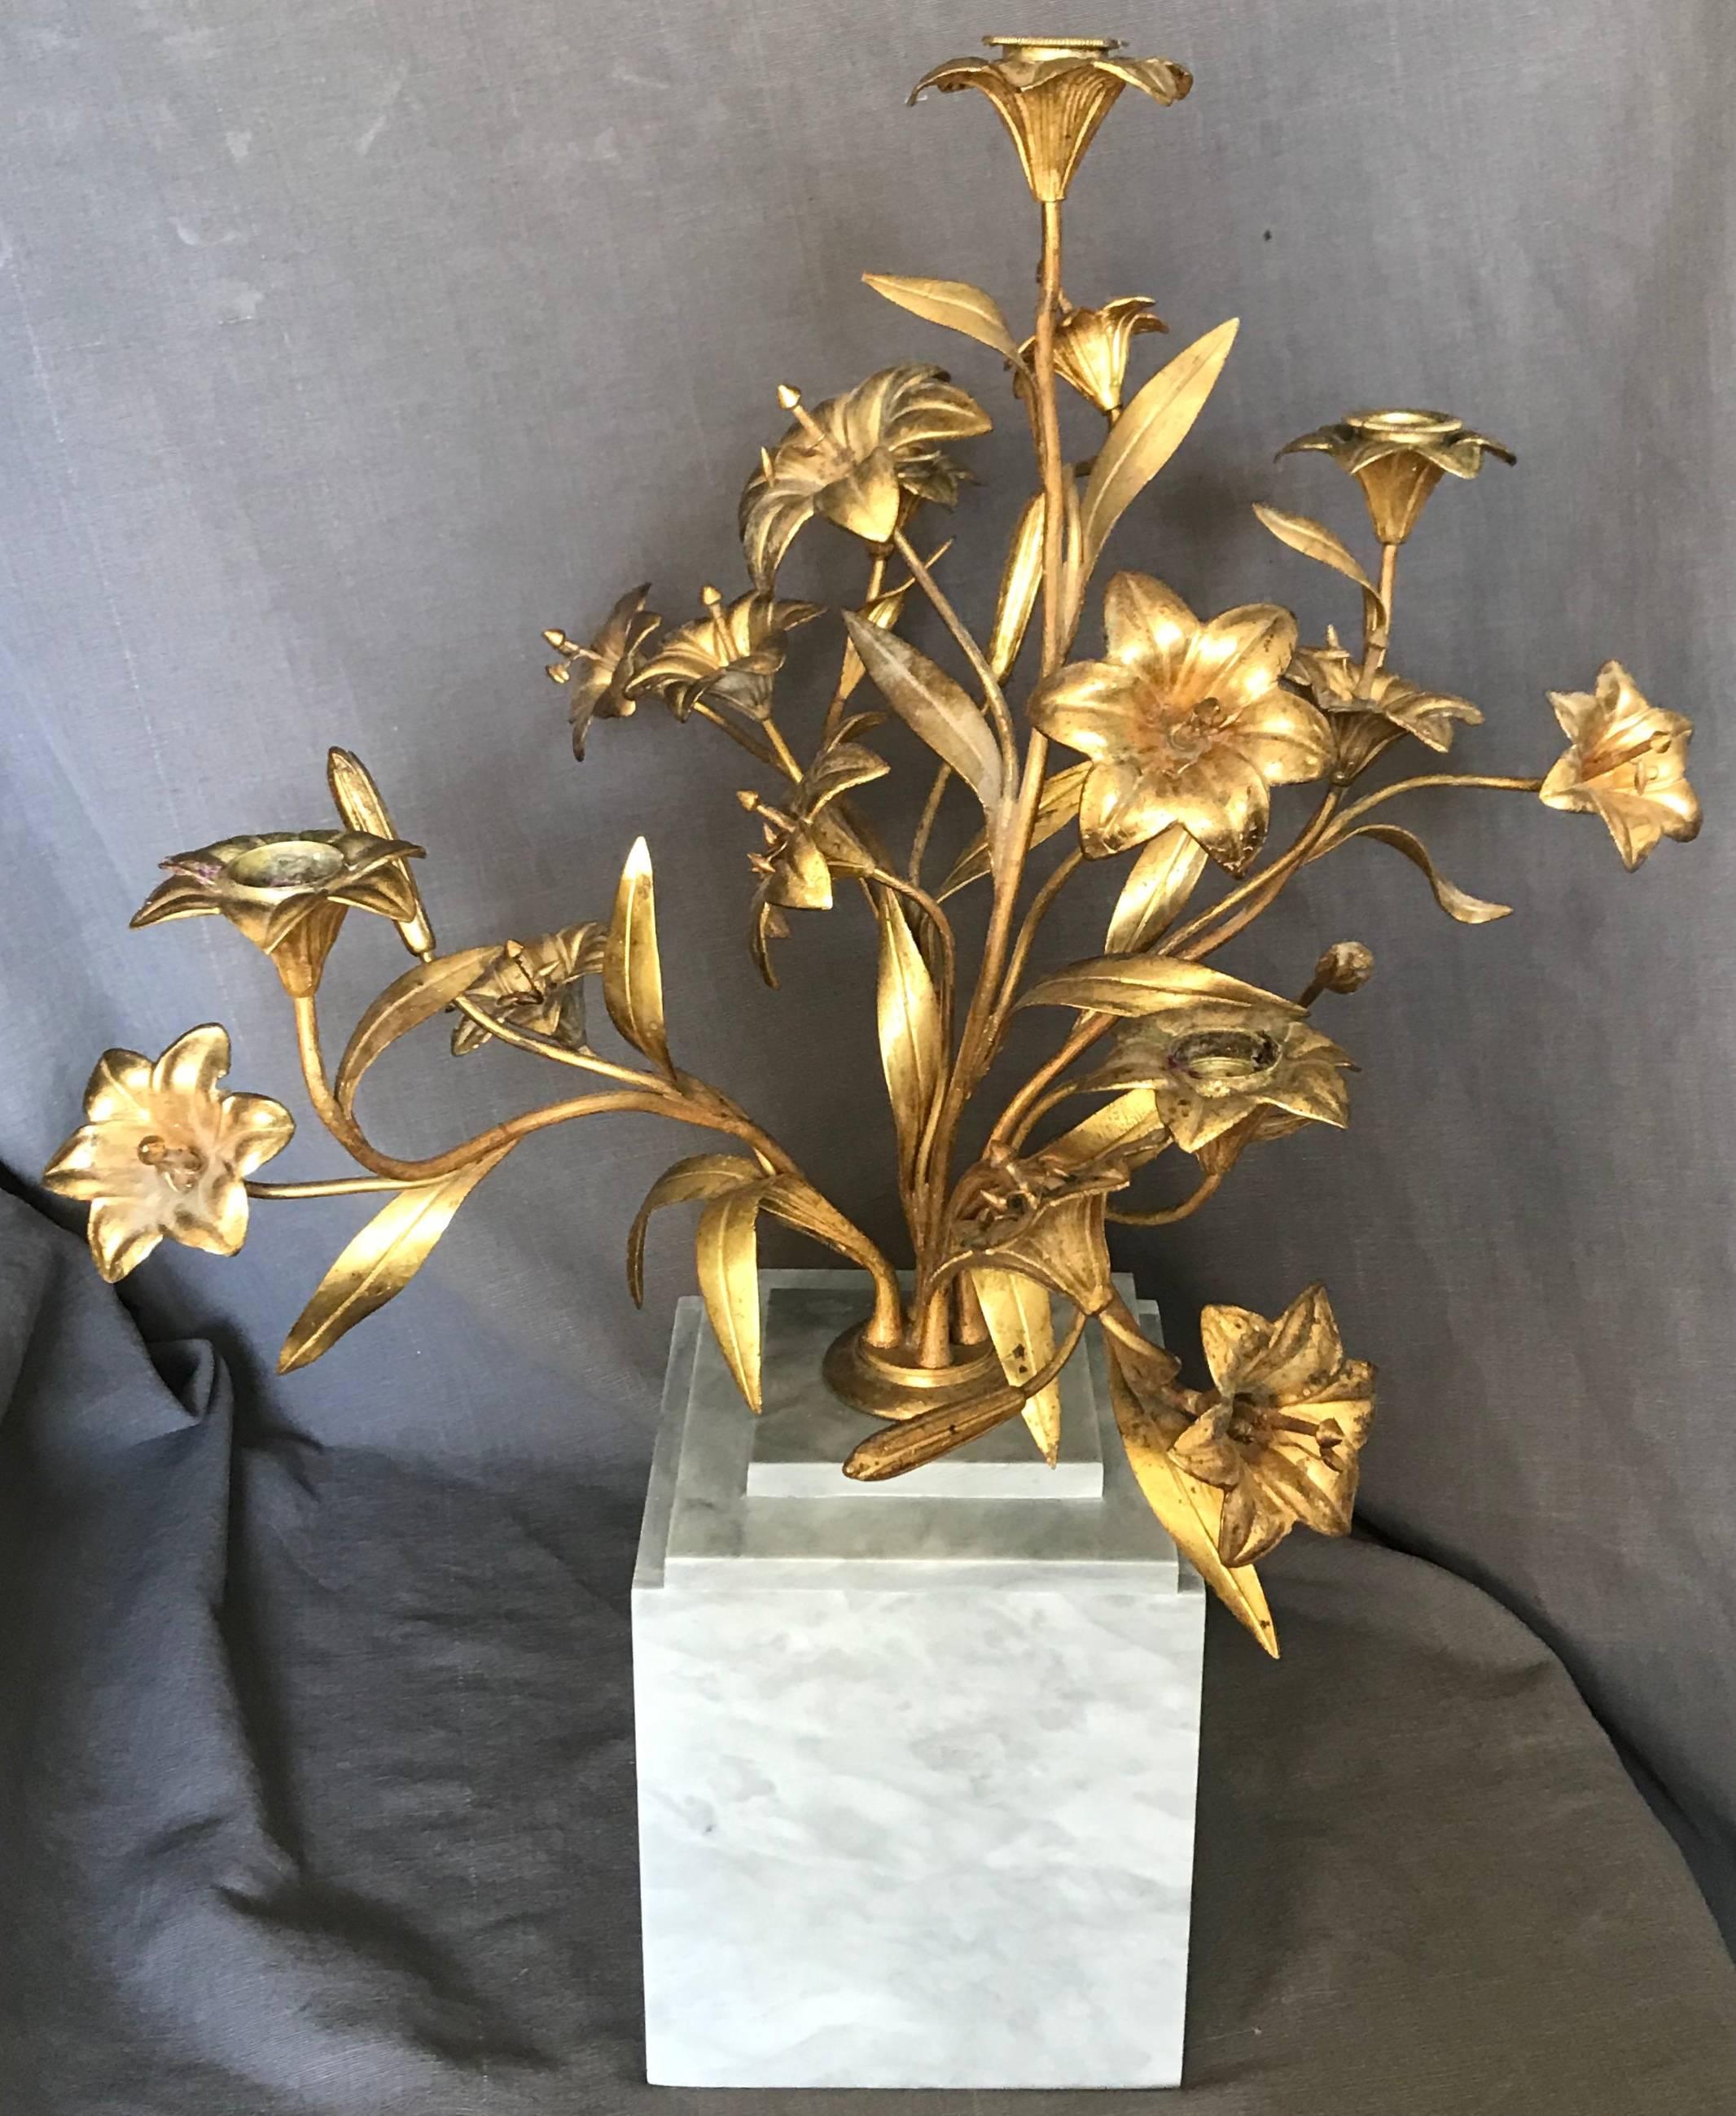 Gilt bronze lily candelabra. Gilt lilies candelabra sculptural centrepiece of five stems with lily buds and flowers terminating in five lily candelabra bases for candles all issuing from gilt base mounted on a modern grey marble plinth, France, 20th